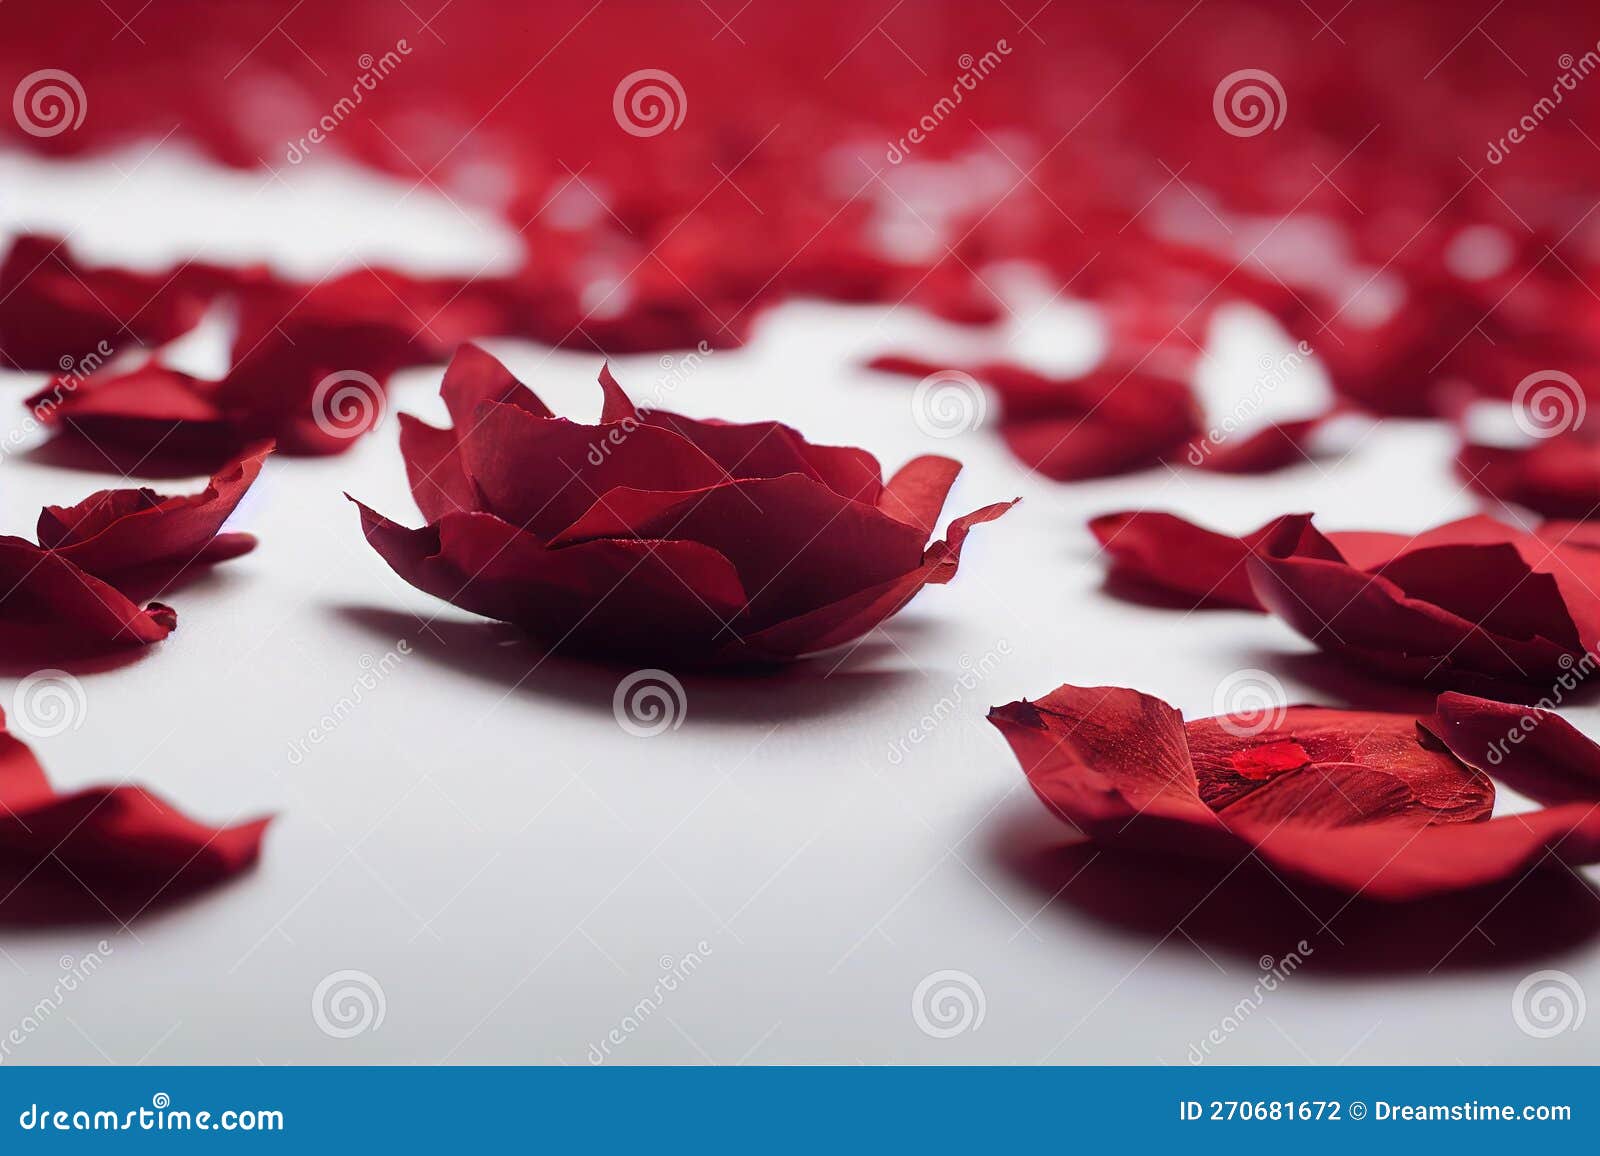 Dried Red Roses  Petals and Paints